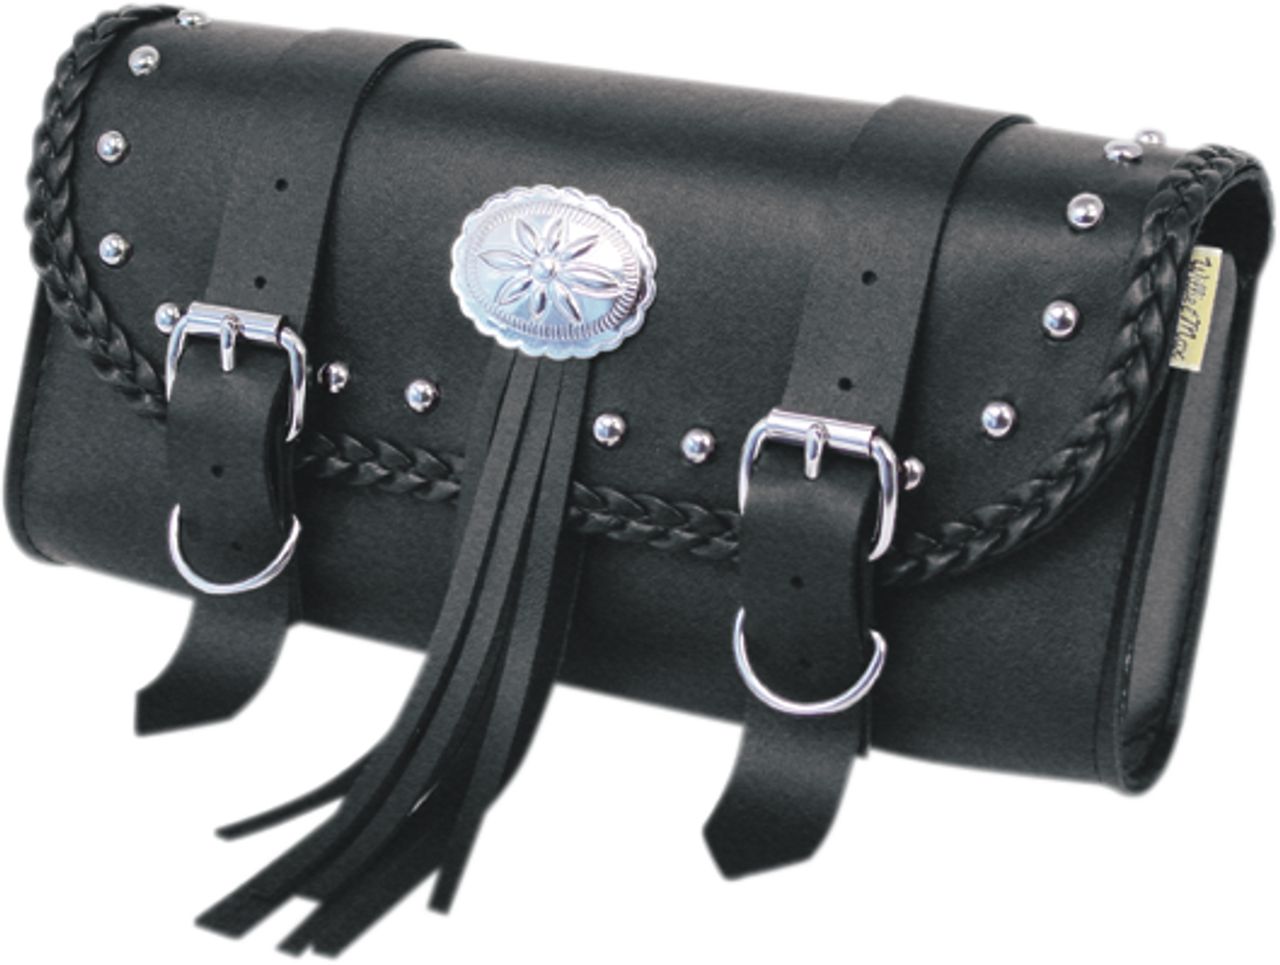 Warrior Tool Pouch